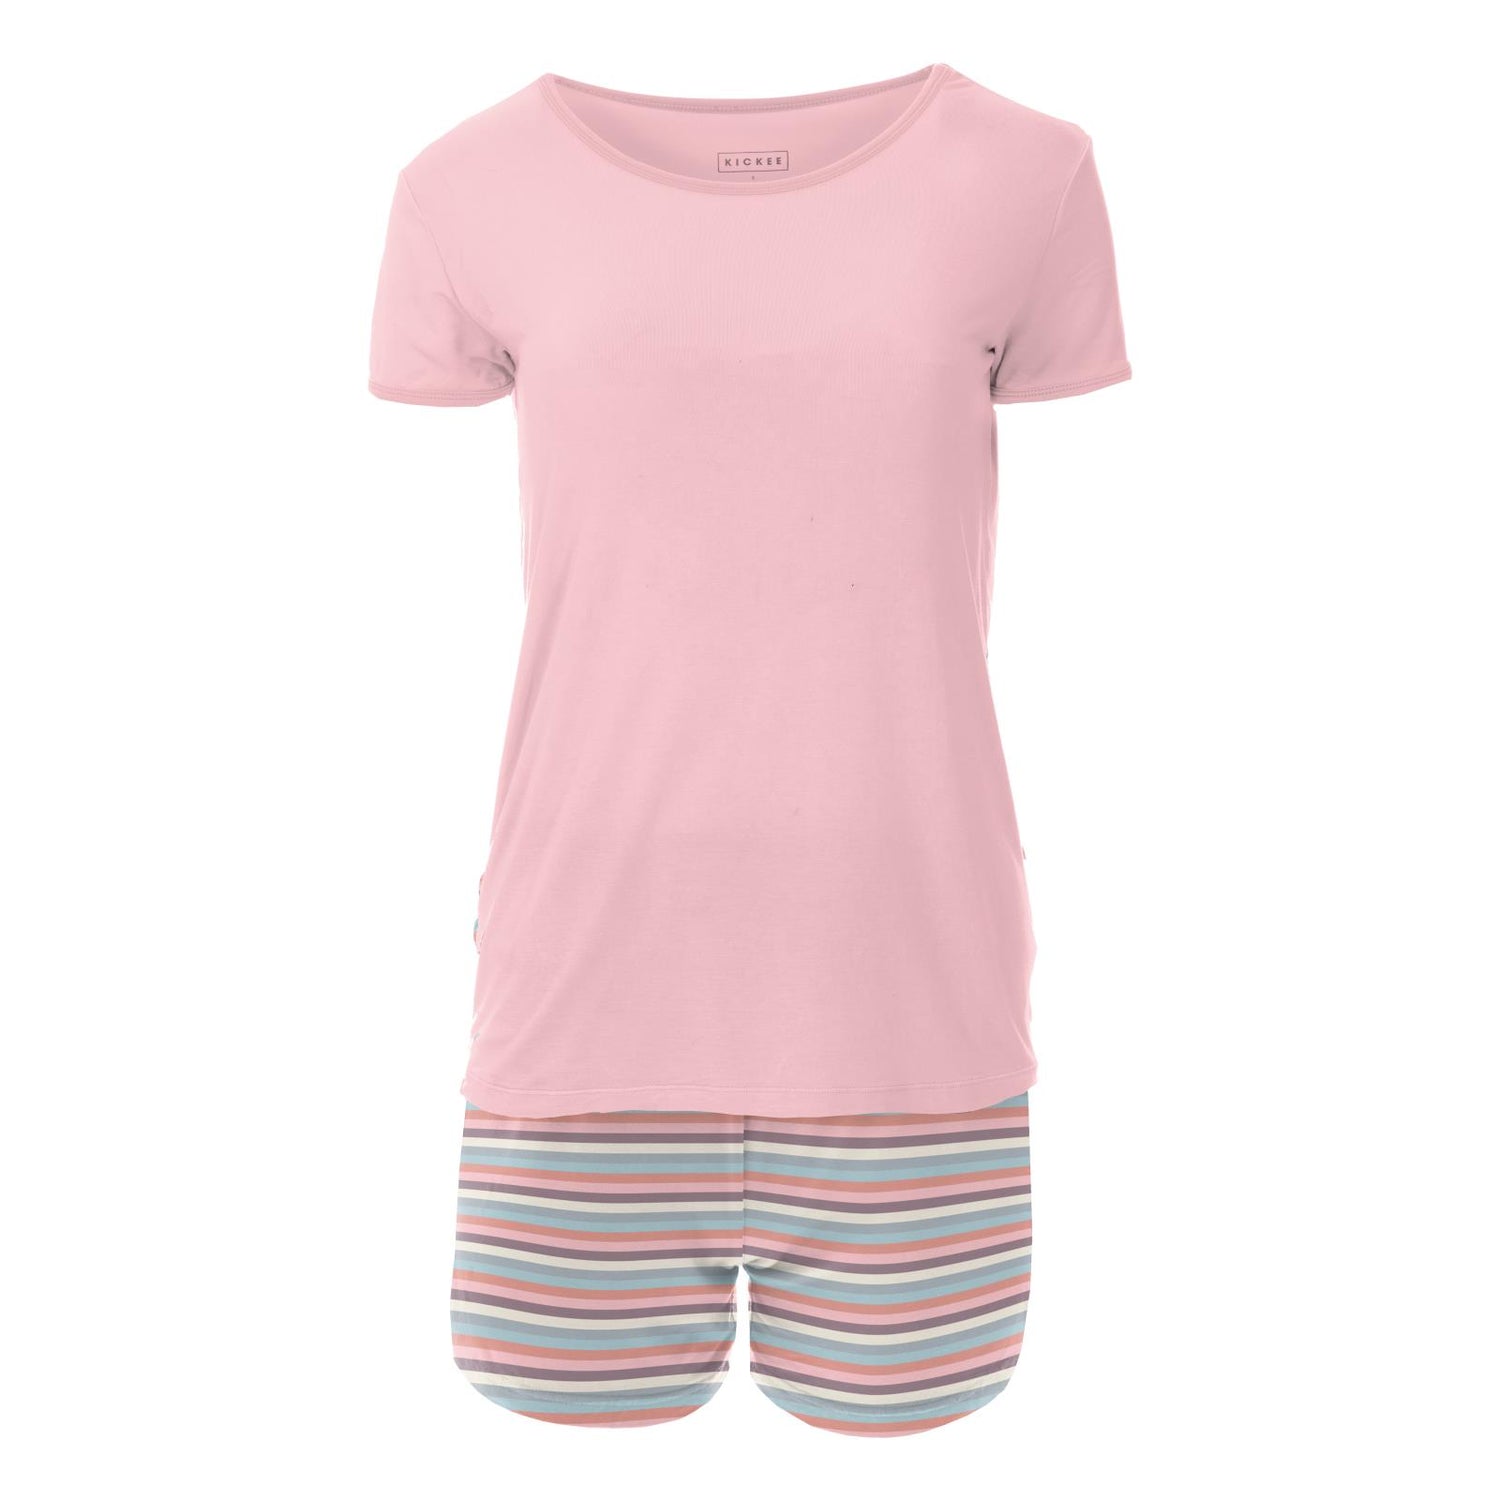 Women's Print Short Sleeve Fitted Pajama Set with Shorts in Spring Bloom Stripe